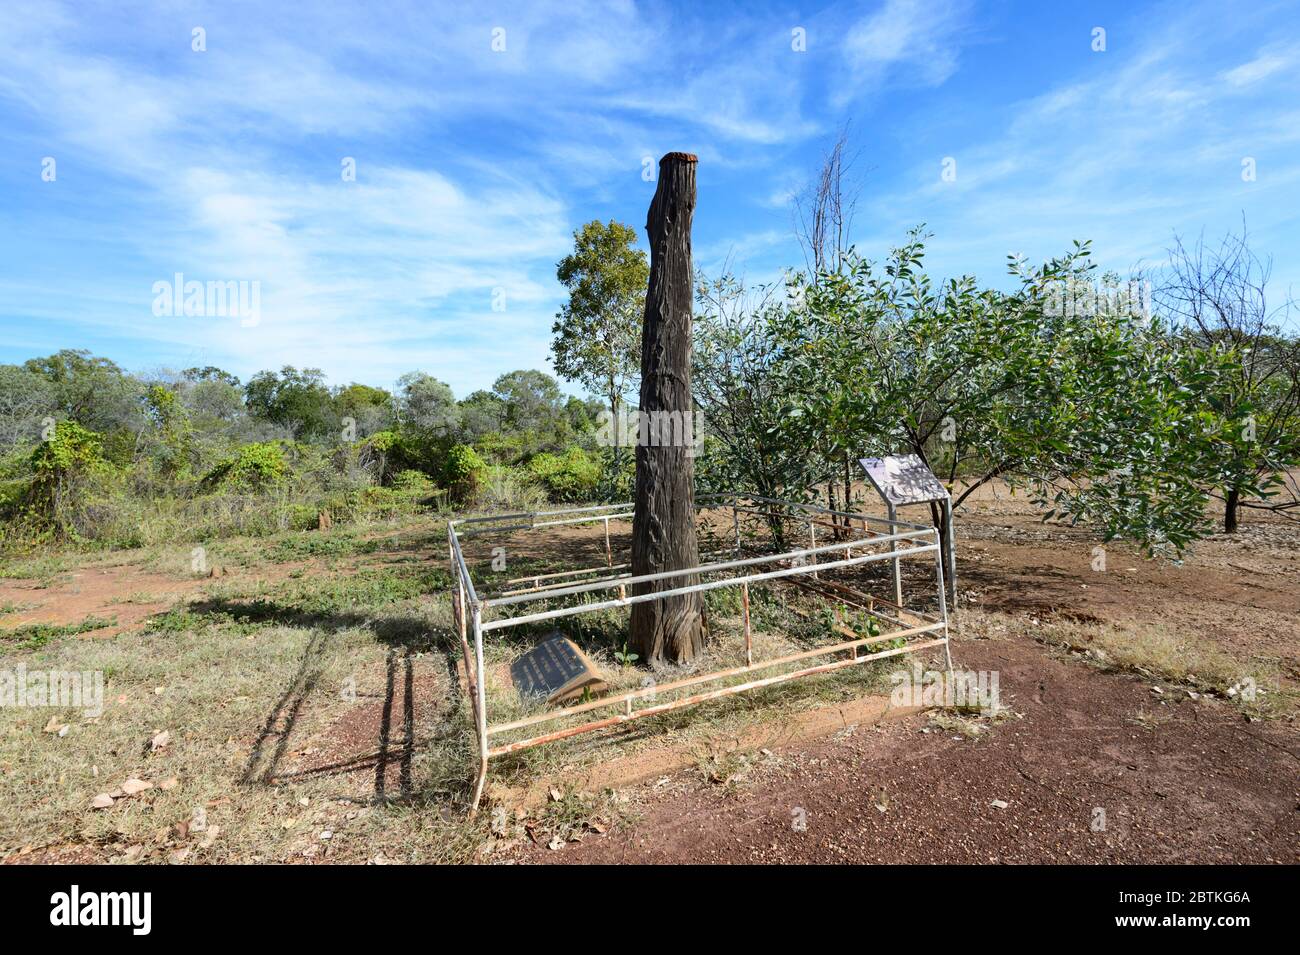 The explorer John McDouall Stuart is presumed to have carved the initial 'S' on this tree, Daly Waters, Northern Territory, NT, Australia Stock Photo